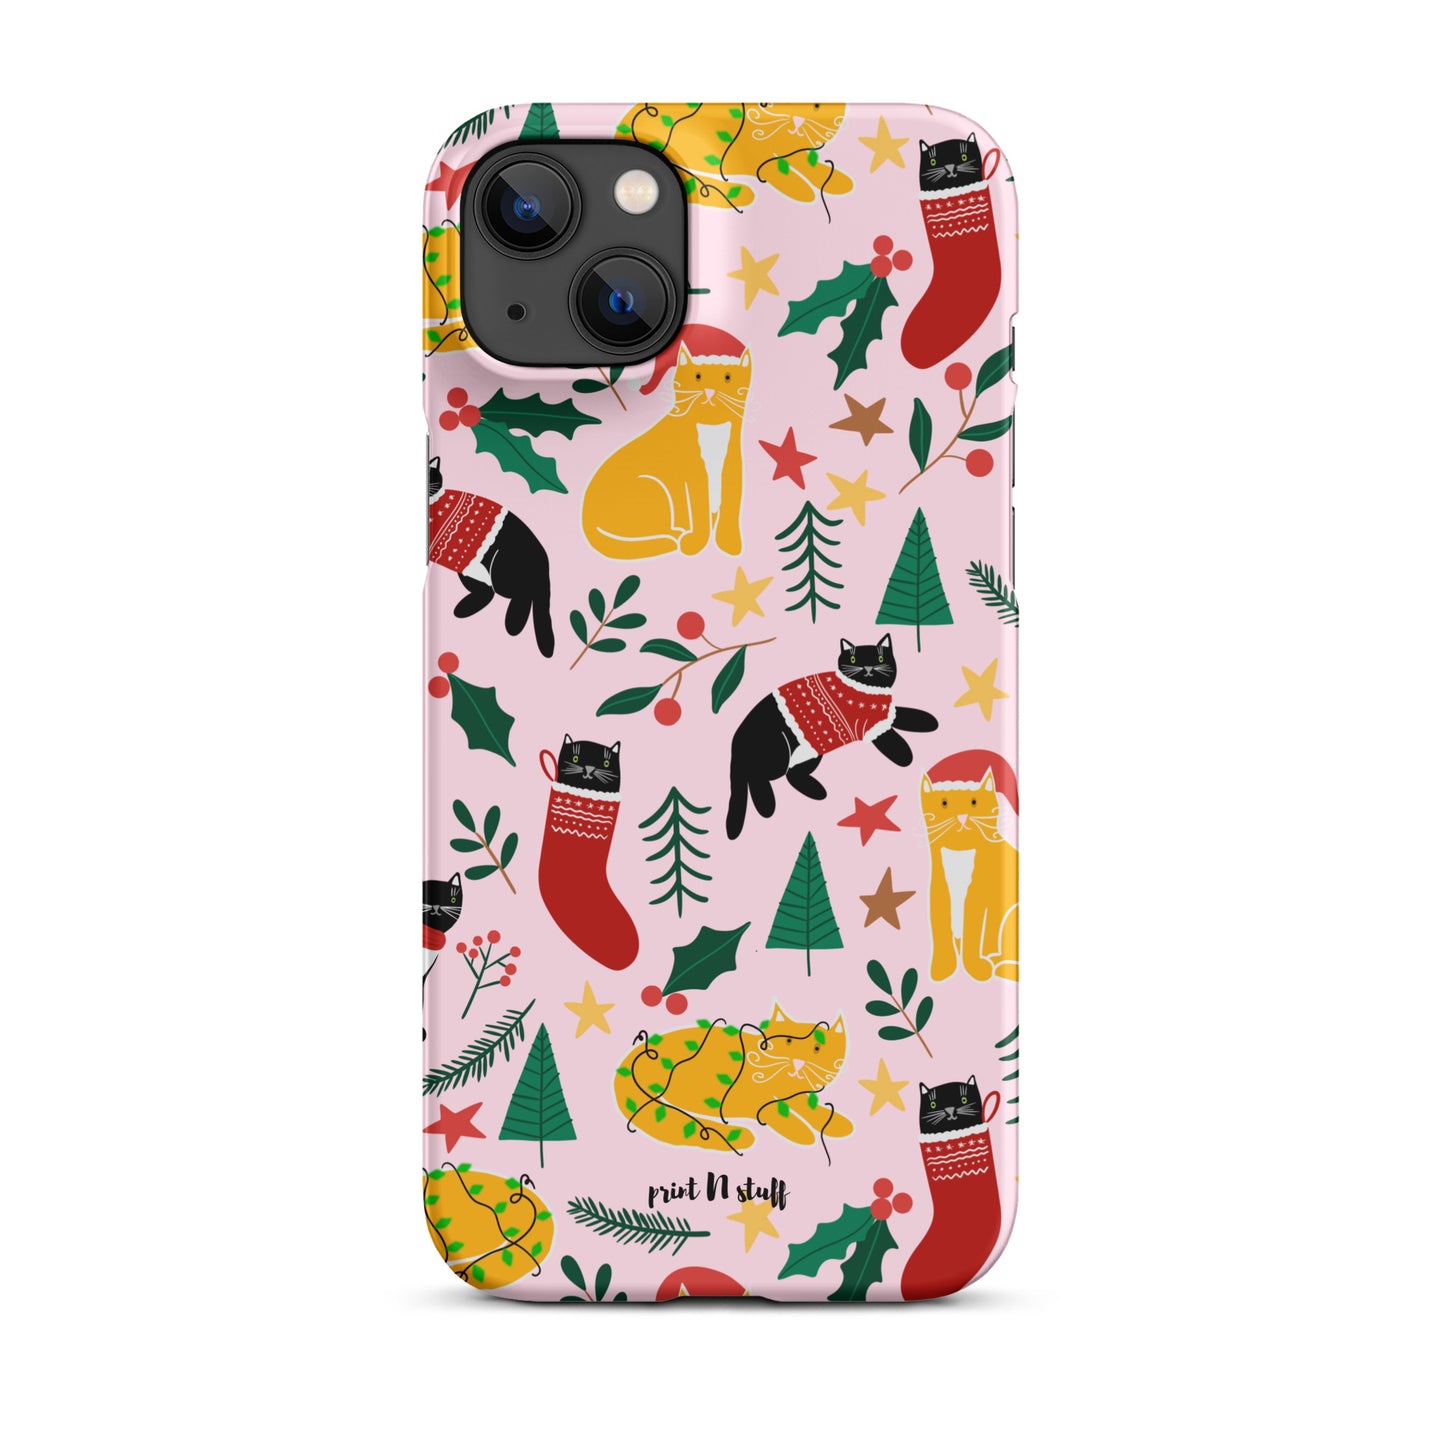 Snap case for iPhone® - Joulukissat / Christmas Cats - Phone Cases- Print N Stuff - [designed in Turku Finland]